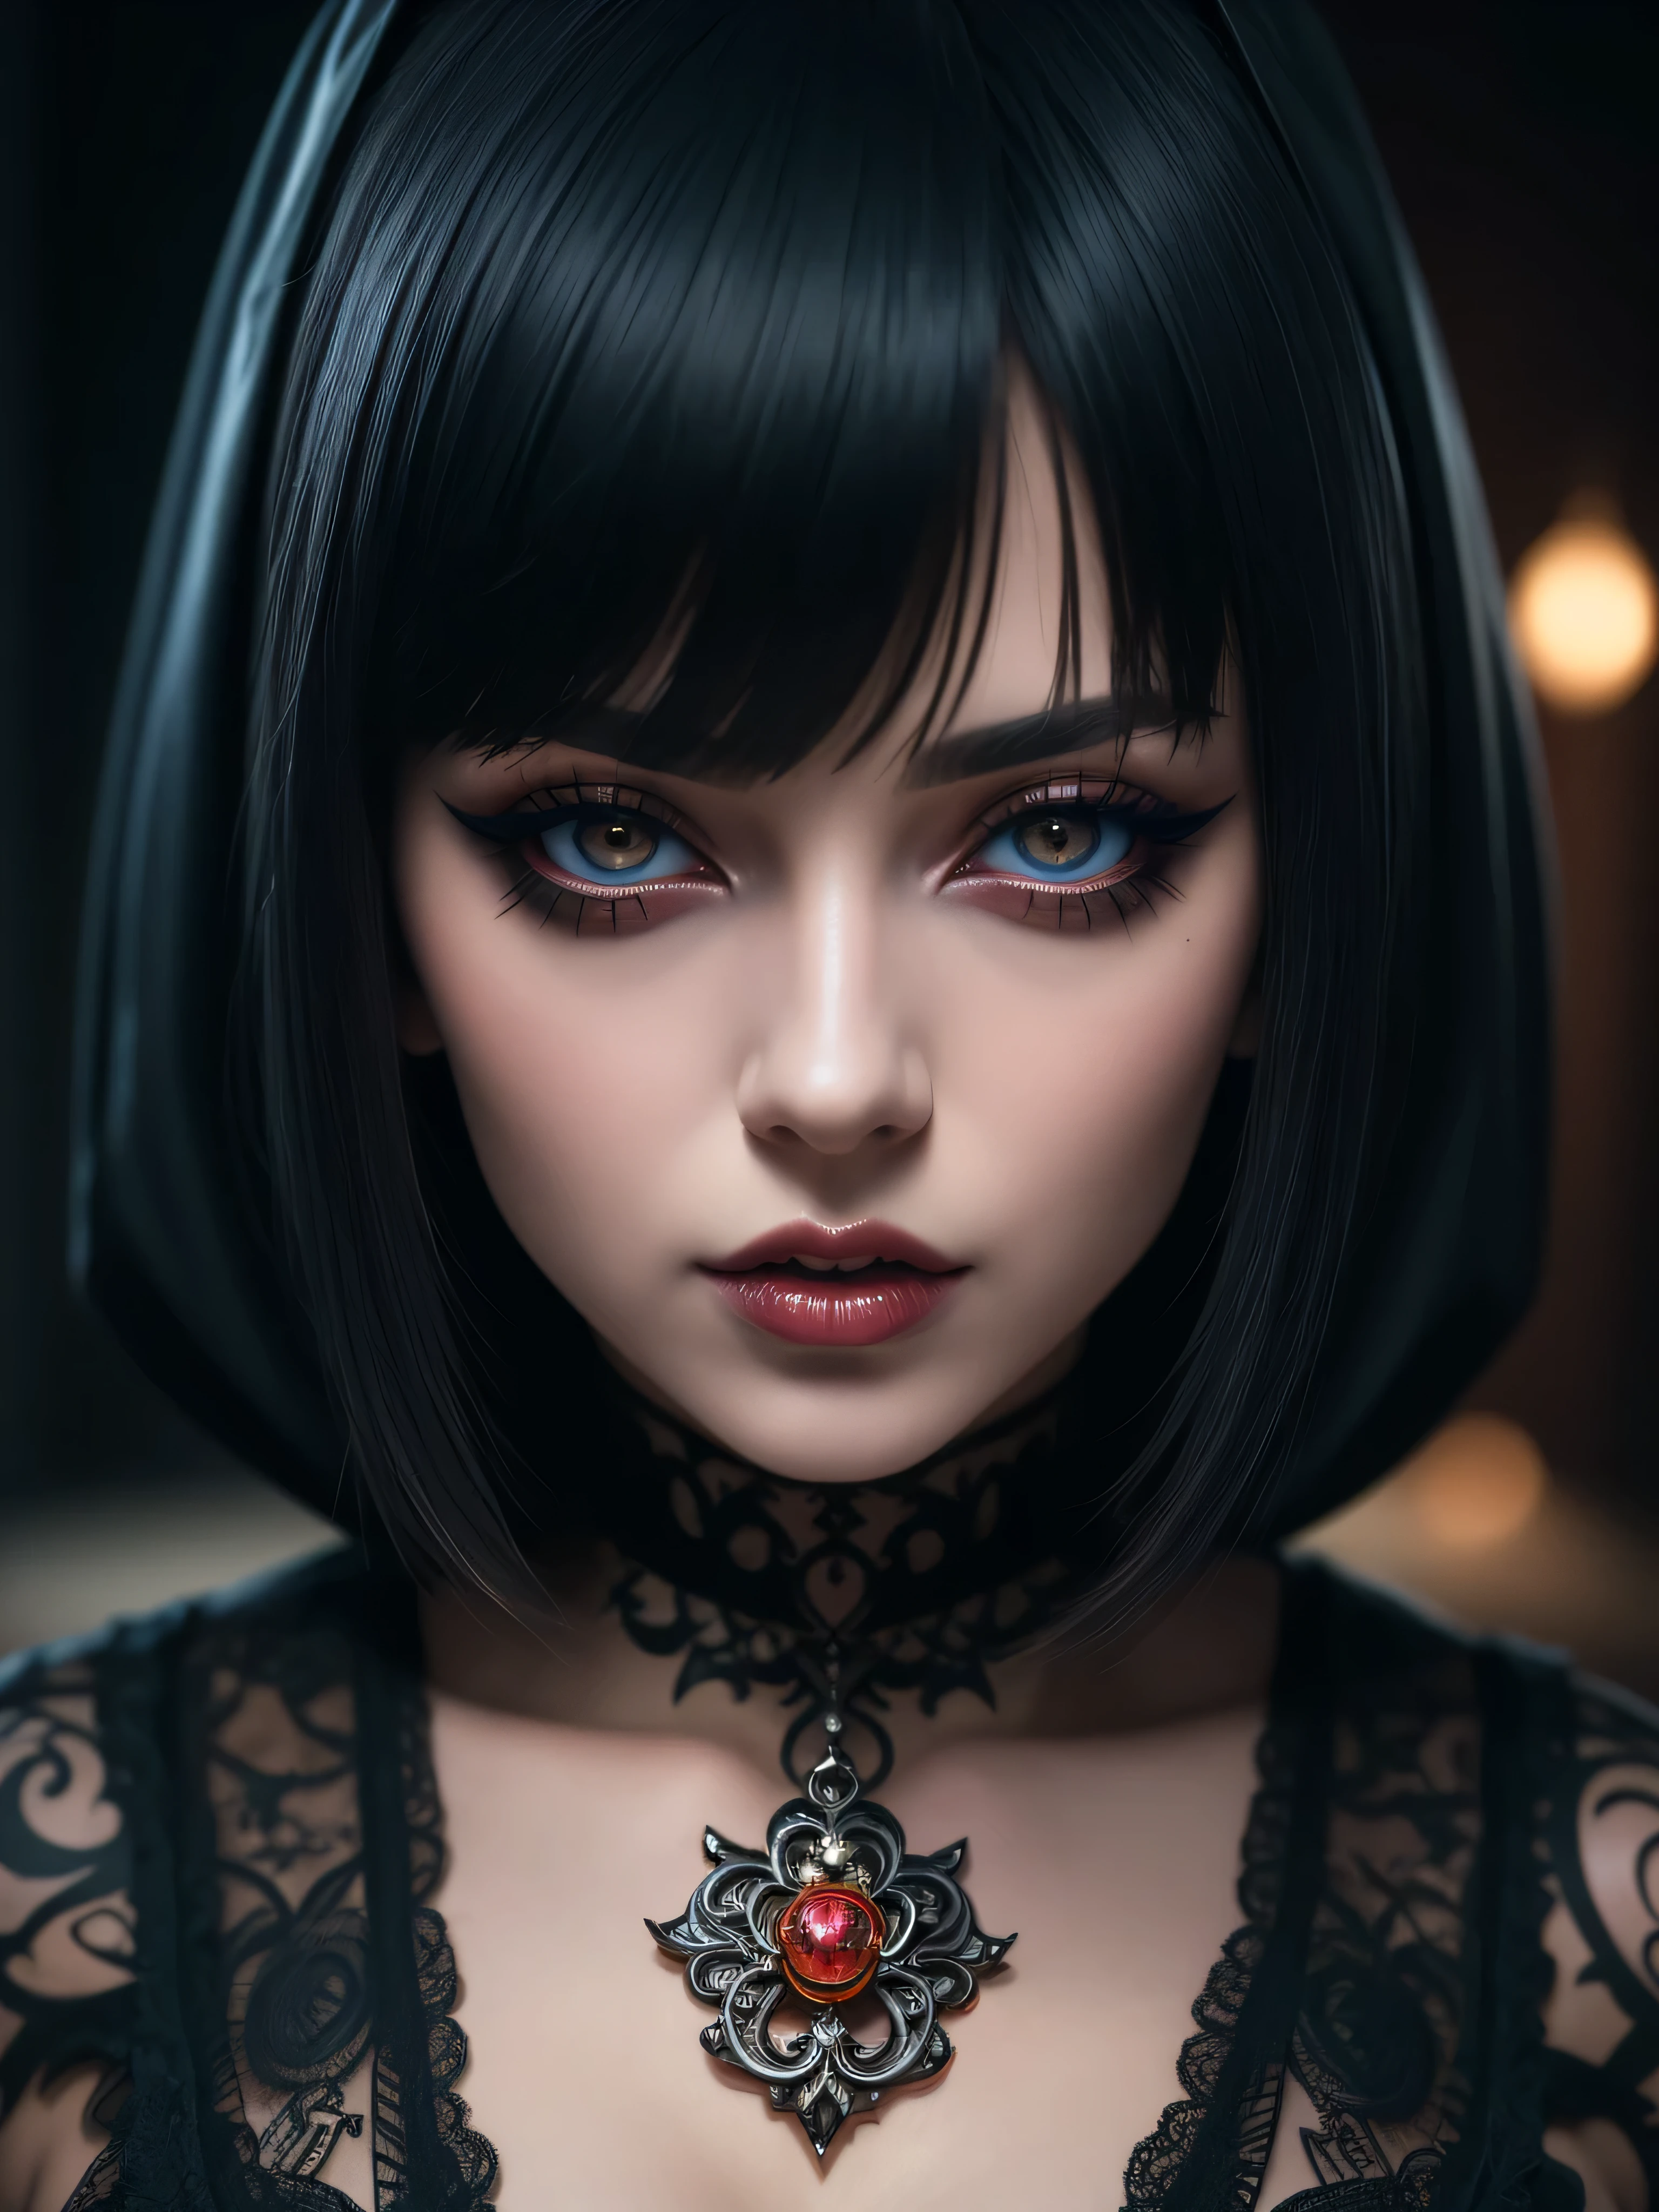 Gothic, (Best quality,4K,8K,a high resolution,masterpiece:1.2), ultra detailed, (Realistic,photoRealistic,photo-Realistic:1.37), erotic art, monastery, nun 30 years old, tattoos, piercing, интимный piercing, lenses, tie, bright blue-red hair, Square haircut, intense gaze, juicy lips, Exquisite make-up, Beautiful eyes, sensual figure, seductive pose, provocative passion, seductive desire, enticing details, An exciting composition, sensual atmosphere, bright colors, soft lighting, subtle erotica, nsfv, One, 1 girl, without inscriptions, Without characters, Without letters, correct anatomy, without extra limbs, beautiful female hands